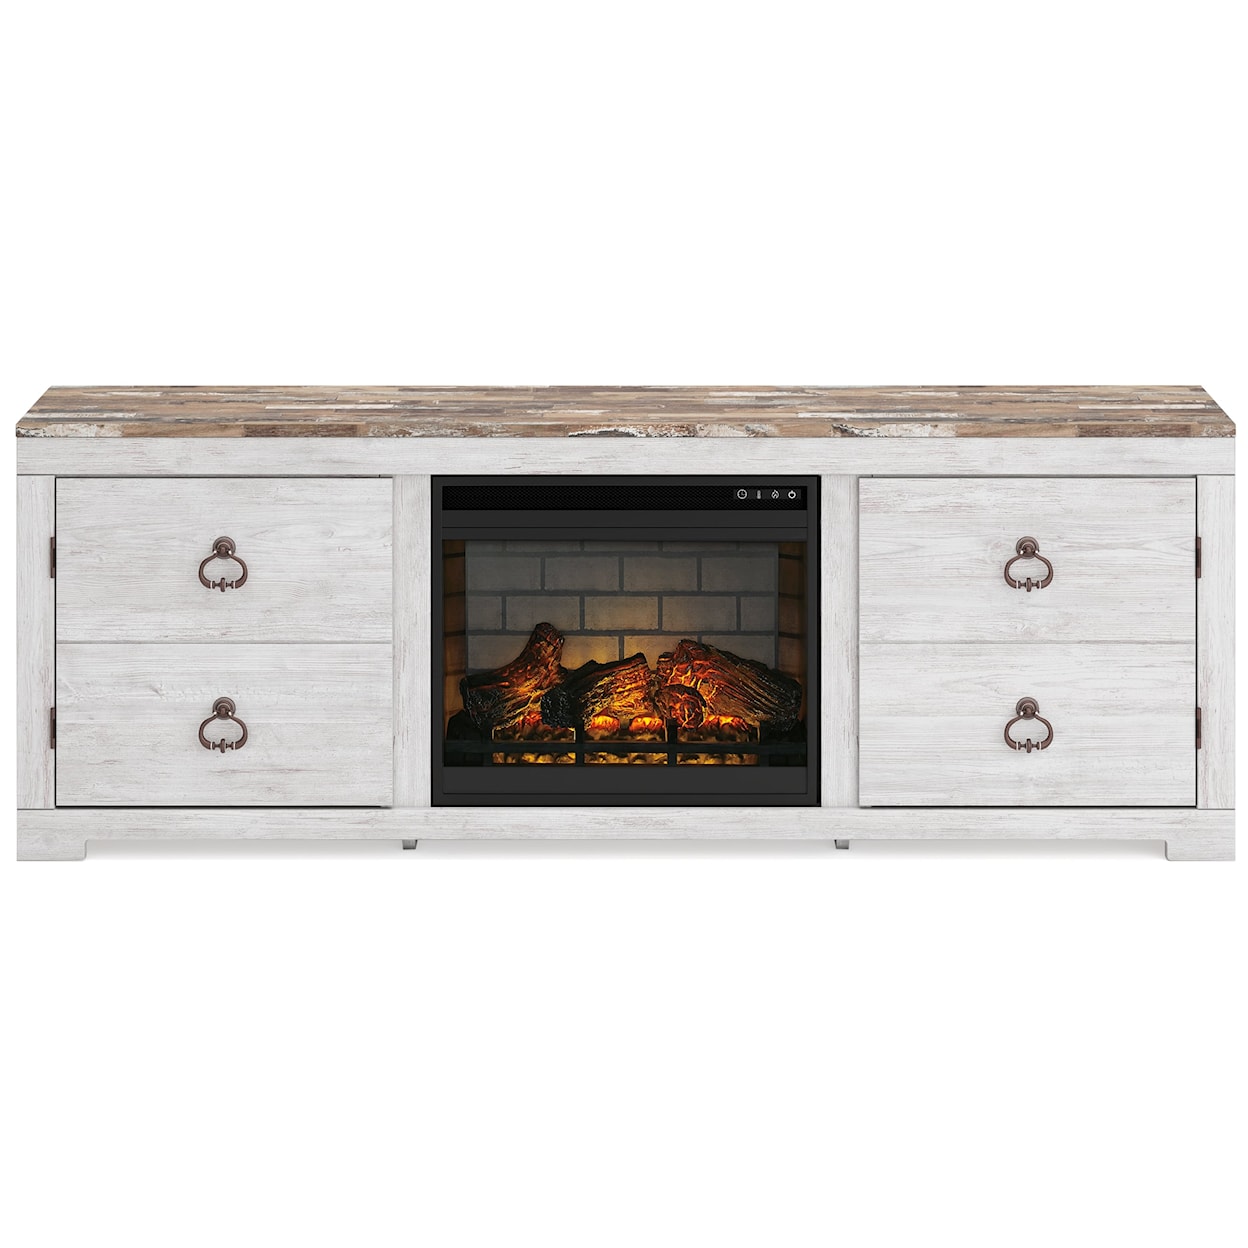 Benchcraft Willowton 72" TV Stand with Electric Fireplace